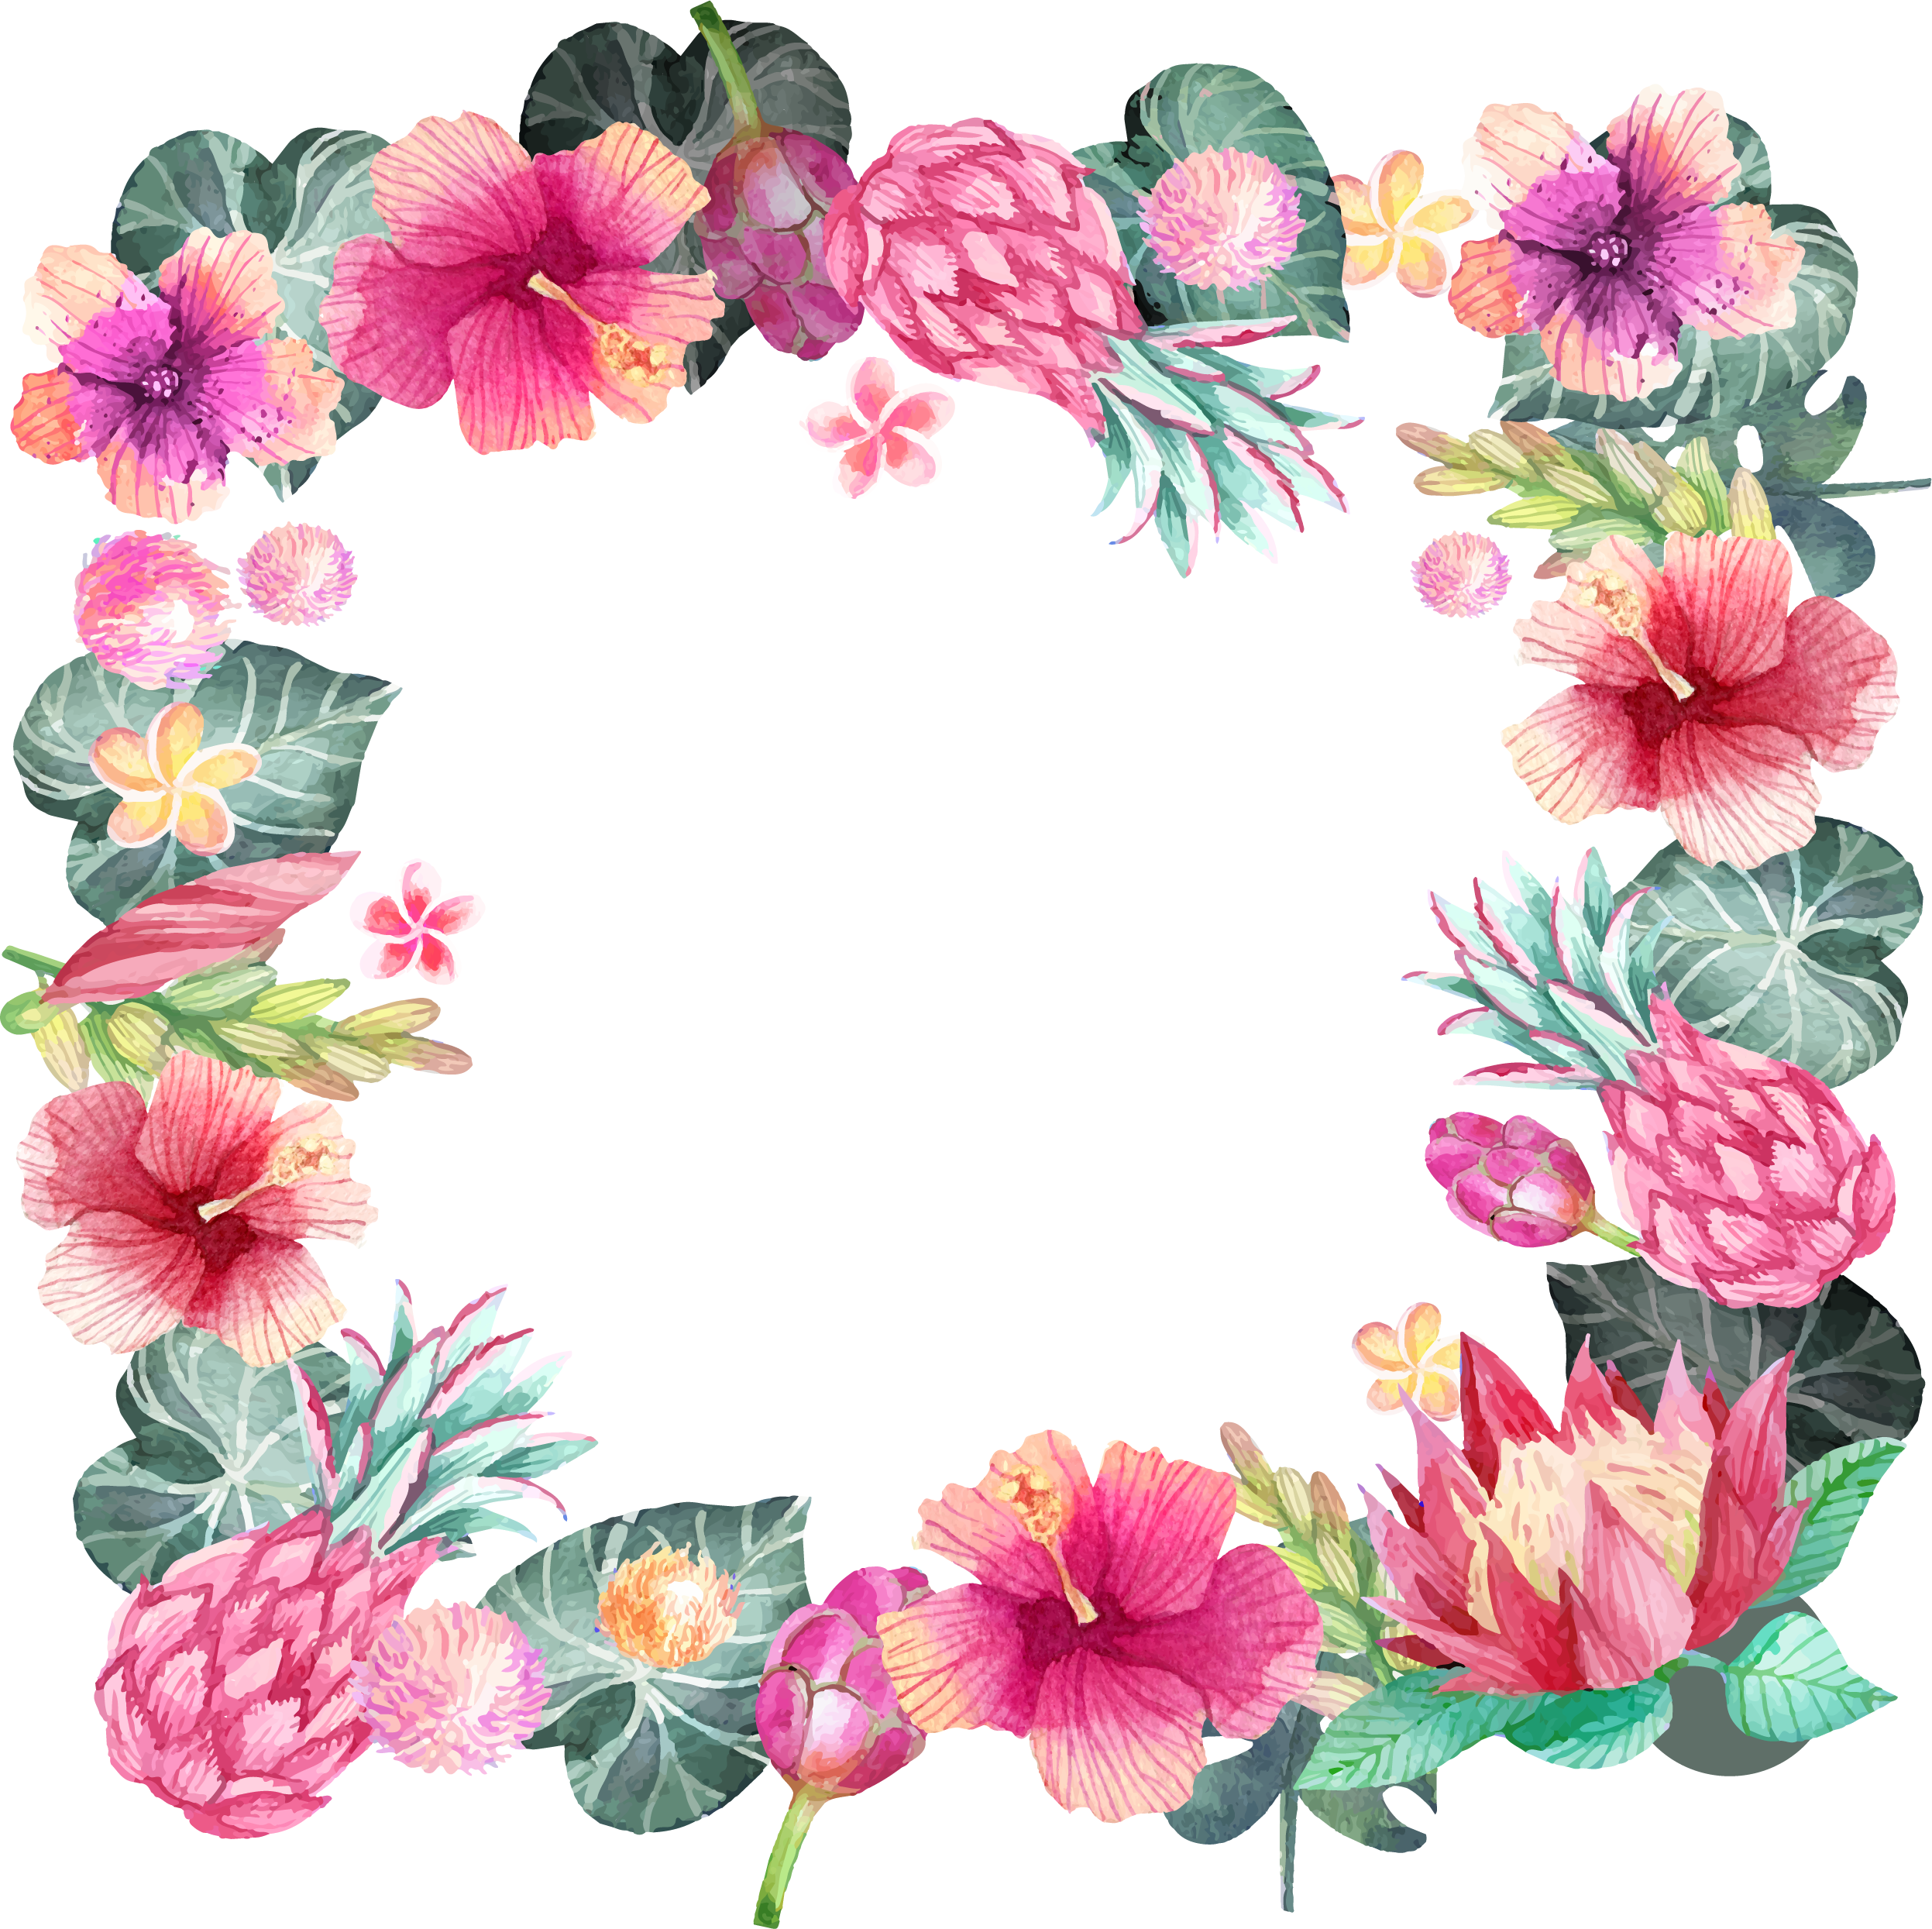 Romantic Watercolor Hand Painted Flower Borders 2494*2490 - Watercolor Painted Flowers Border (2494x2490)